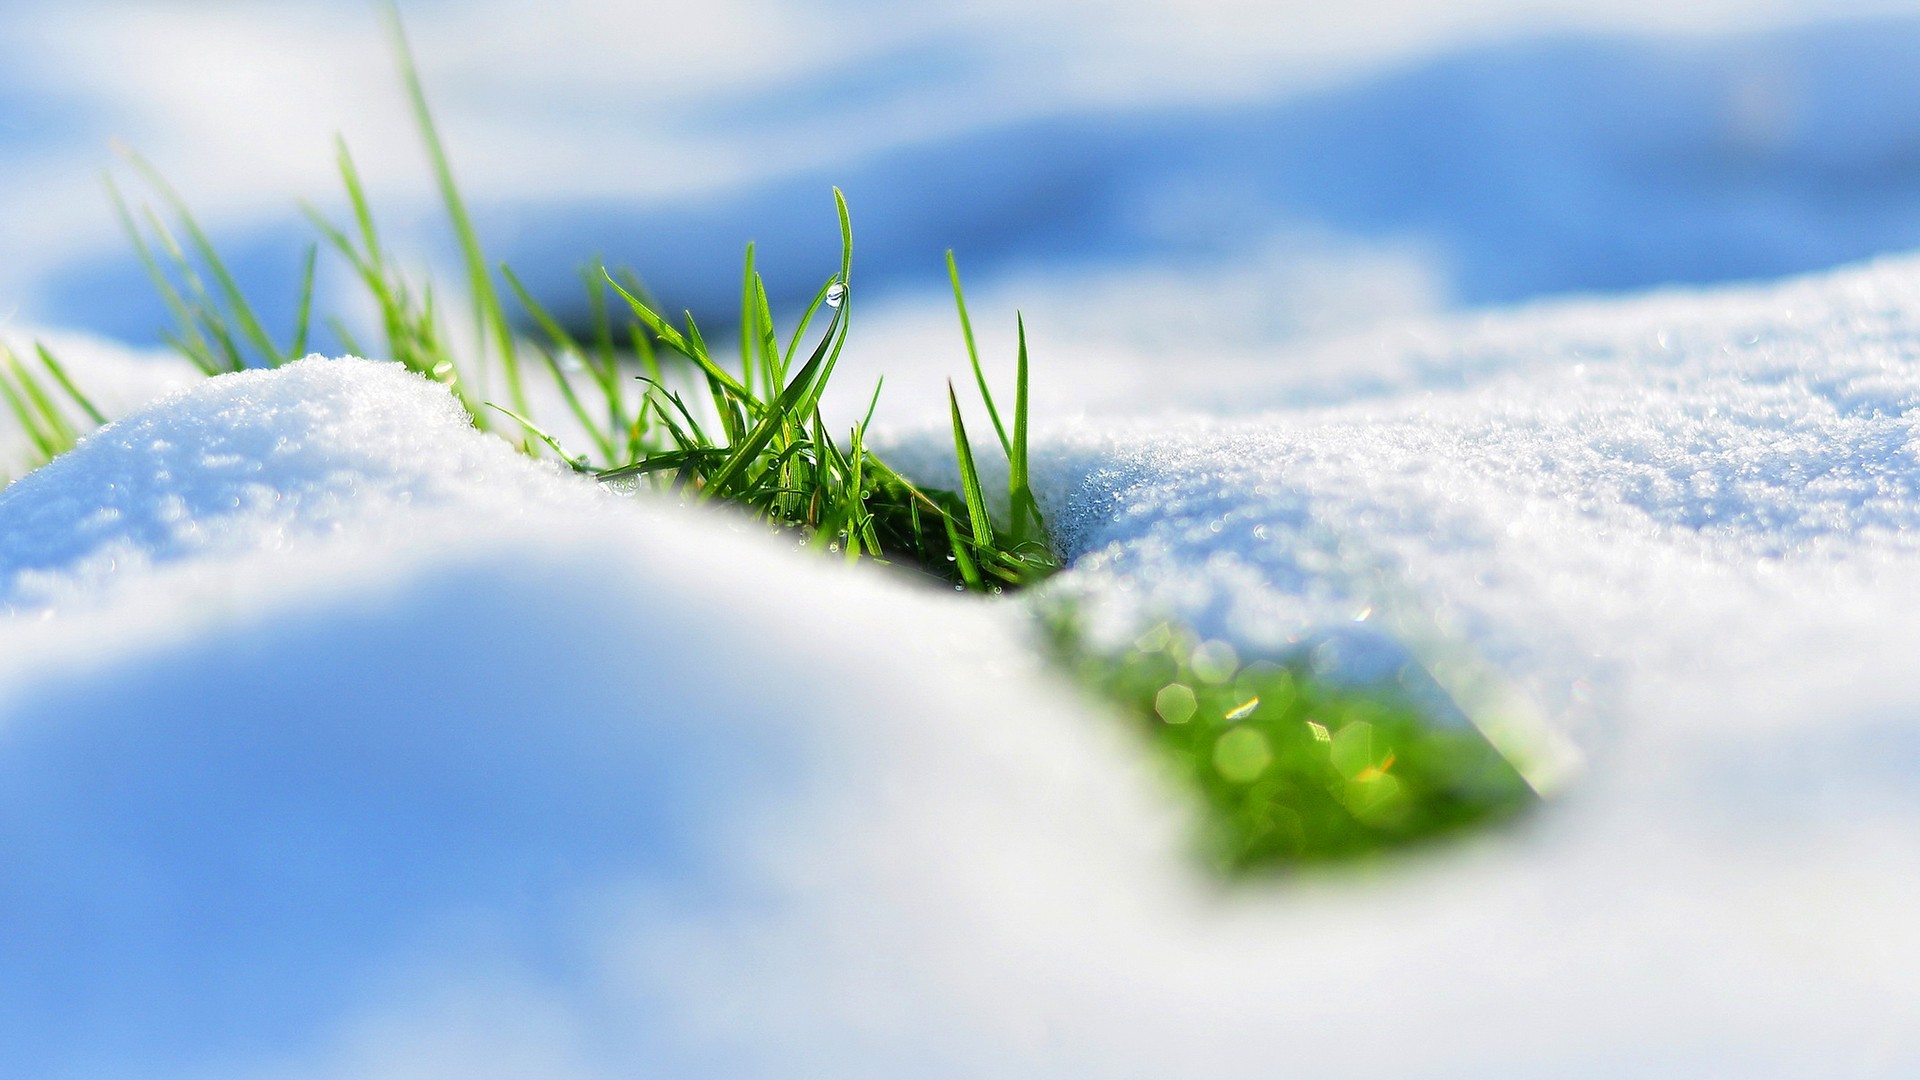 http://www.zastavki.com/pictures/originals/2015/Nature___Seasons___Spring_Grass_makes_its_way_from_under_the_white_snow_099393_.jpg